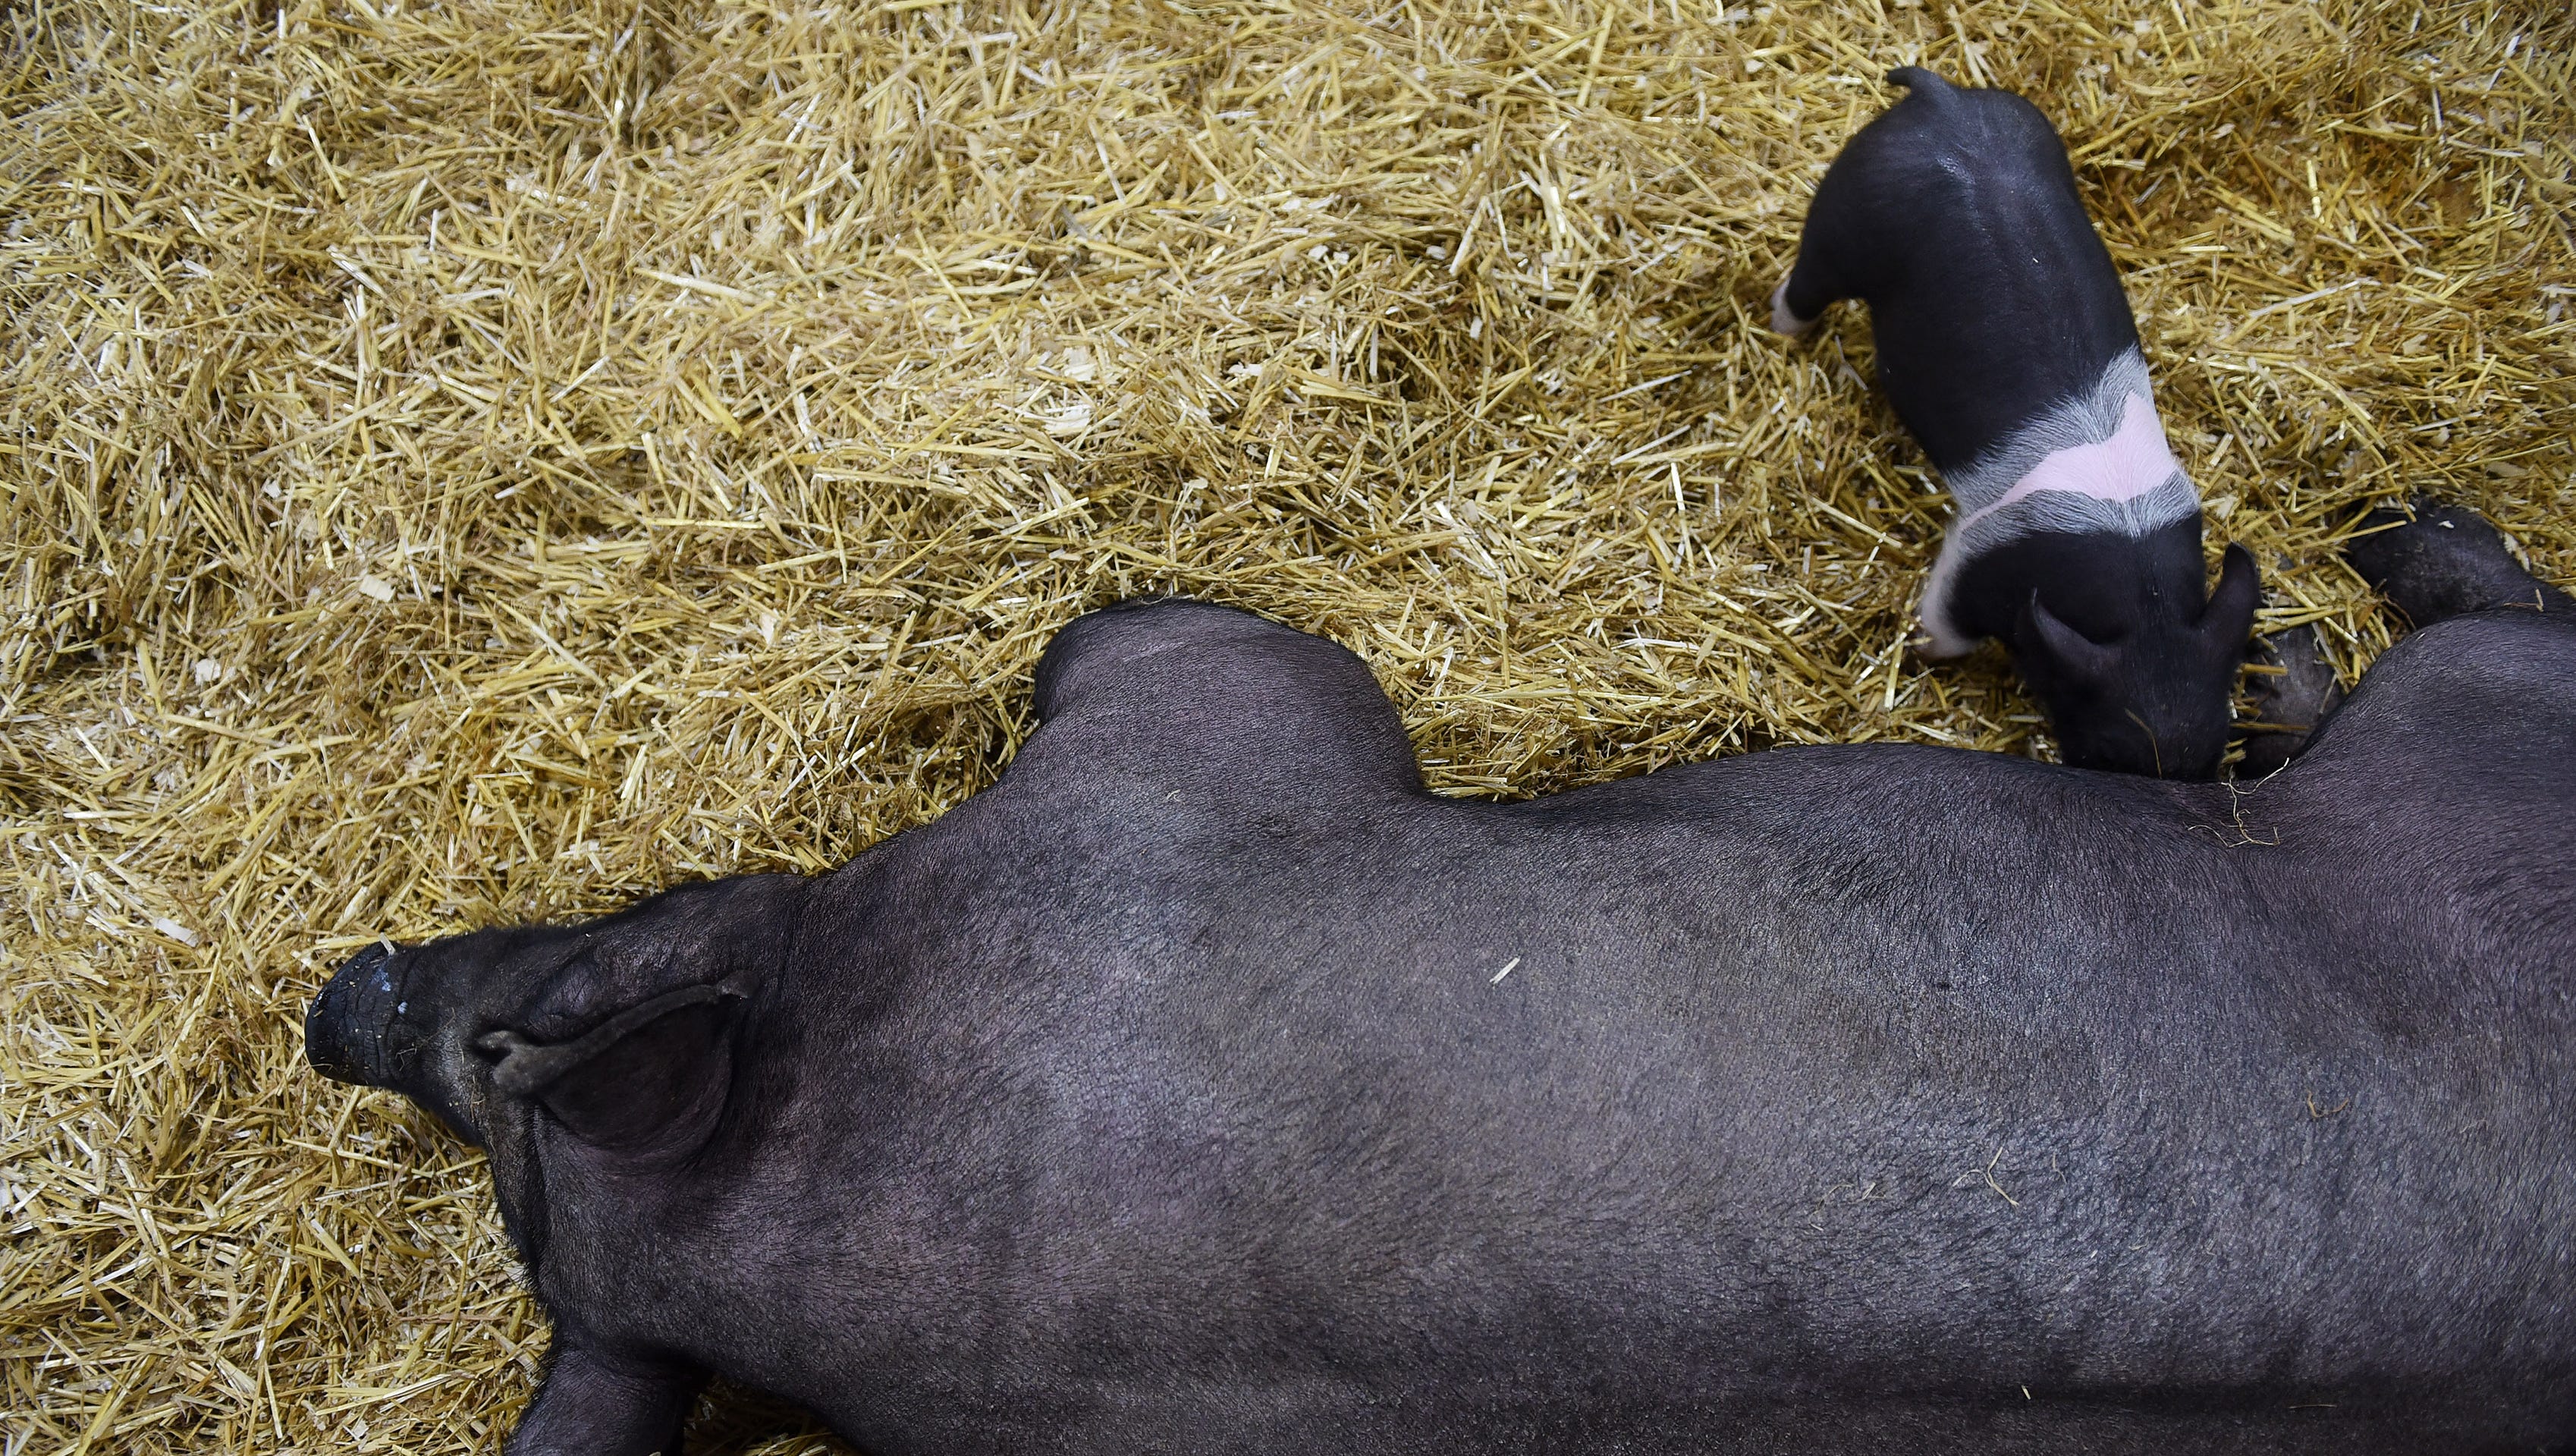 A young pig nurses on its mother, Betty, at the display of Baylee Huff of Durand.